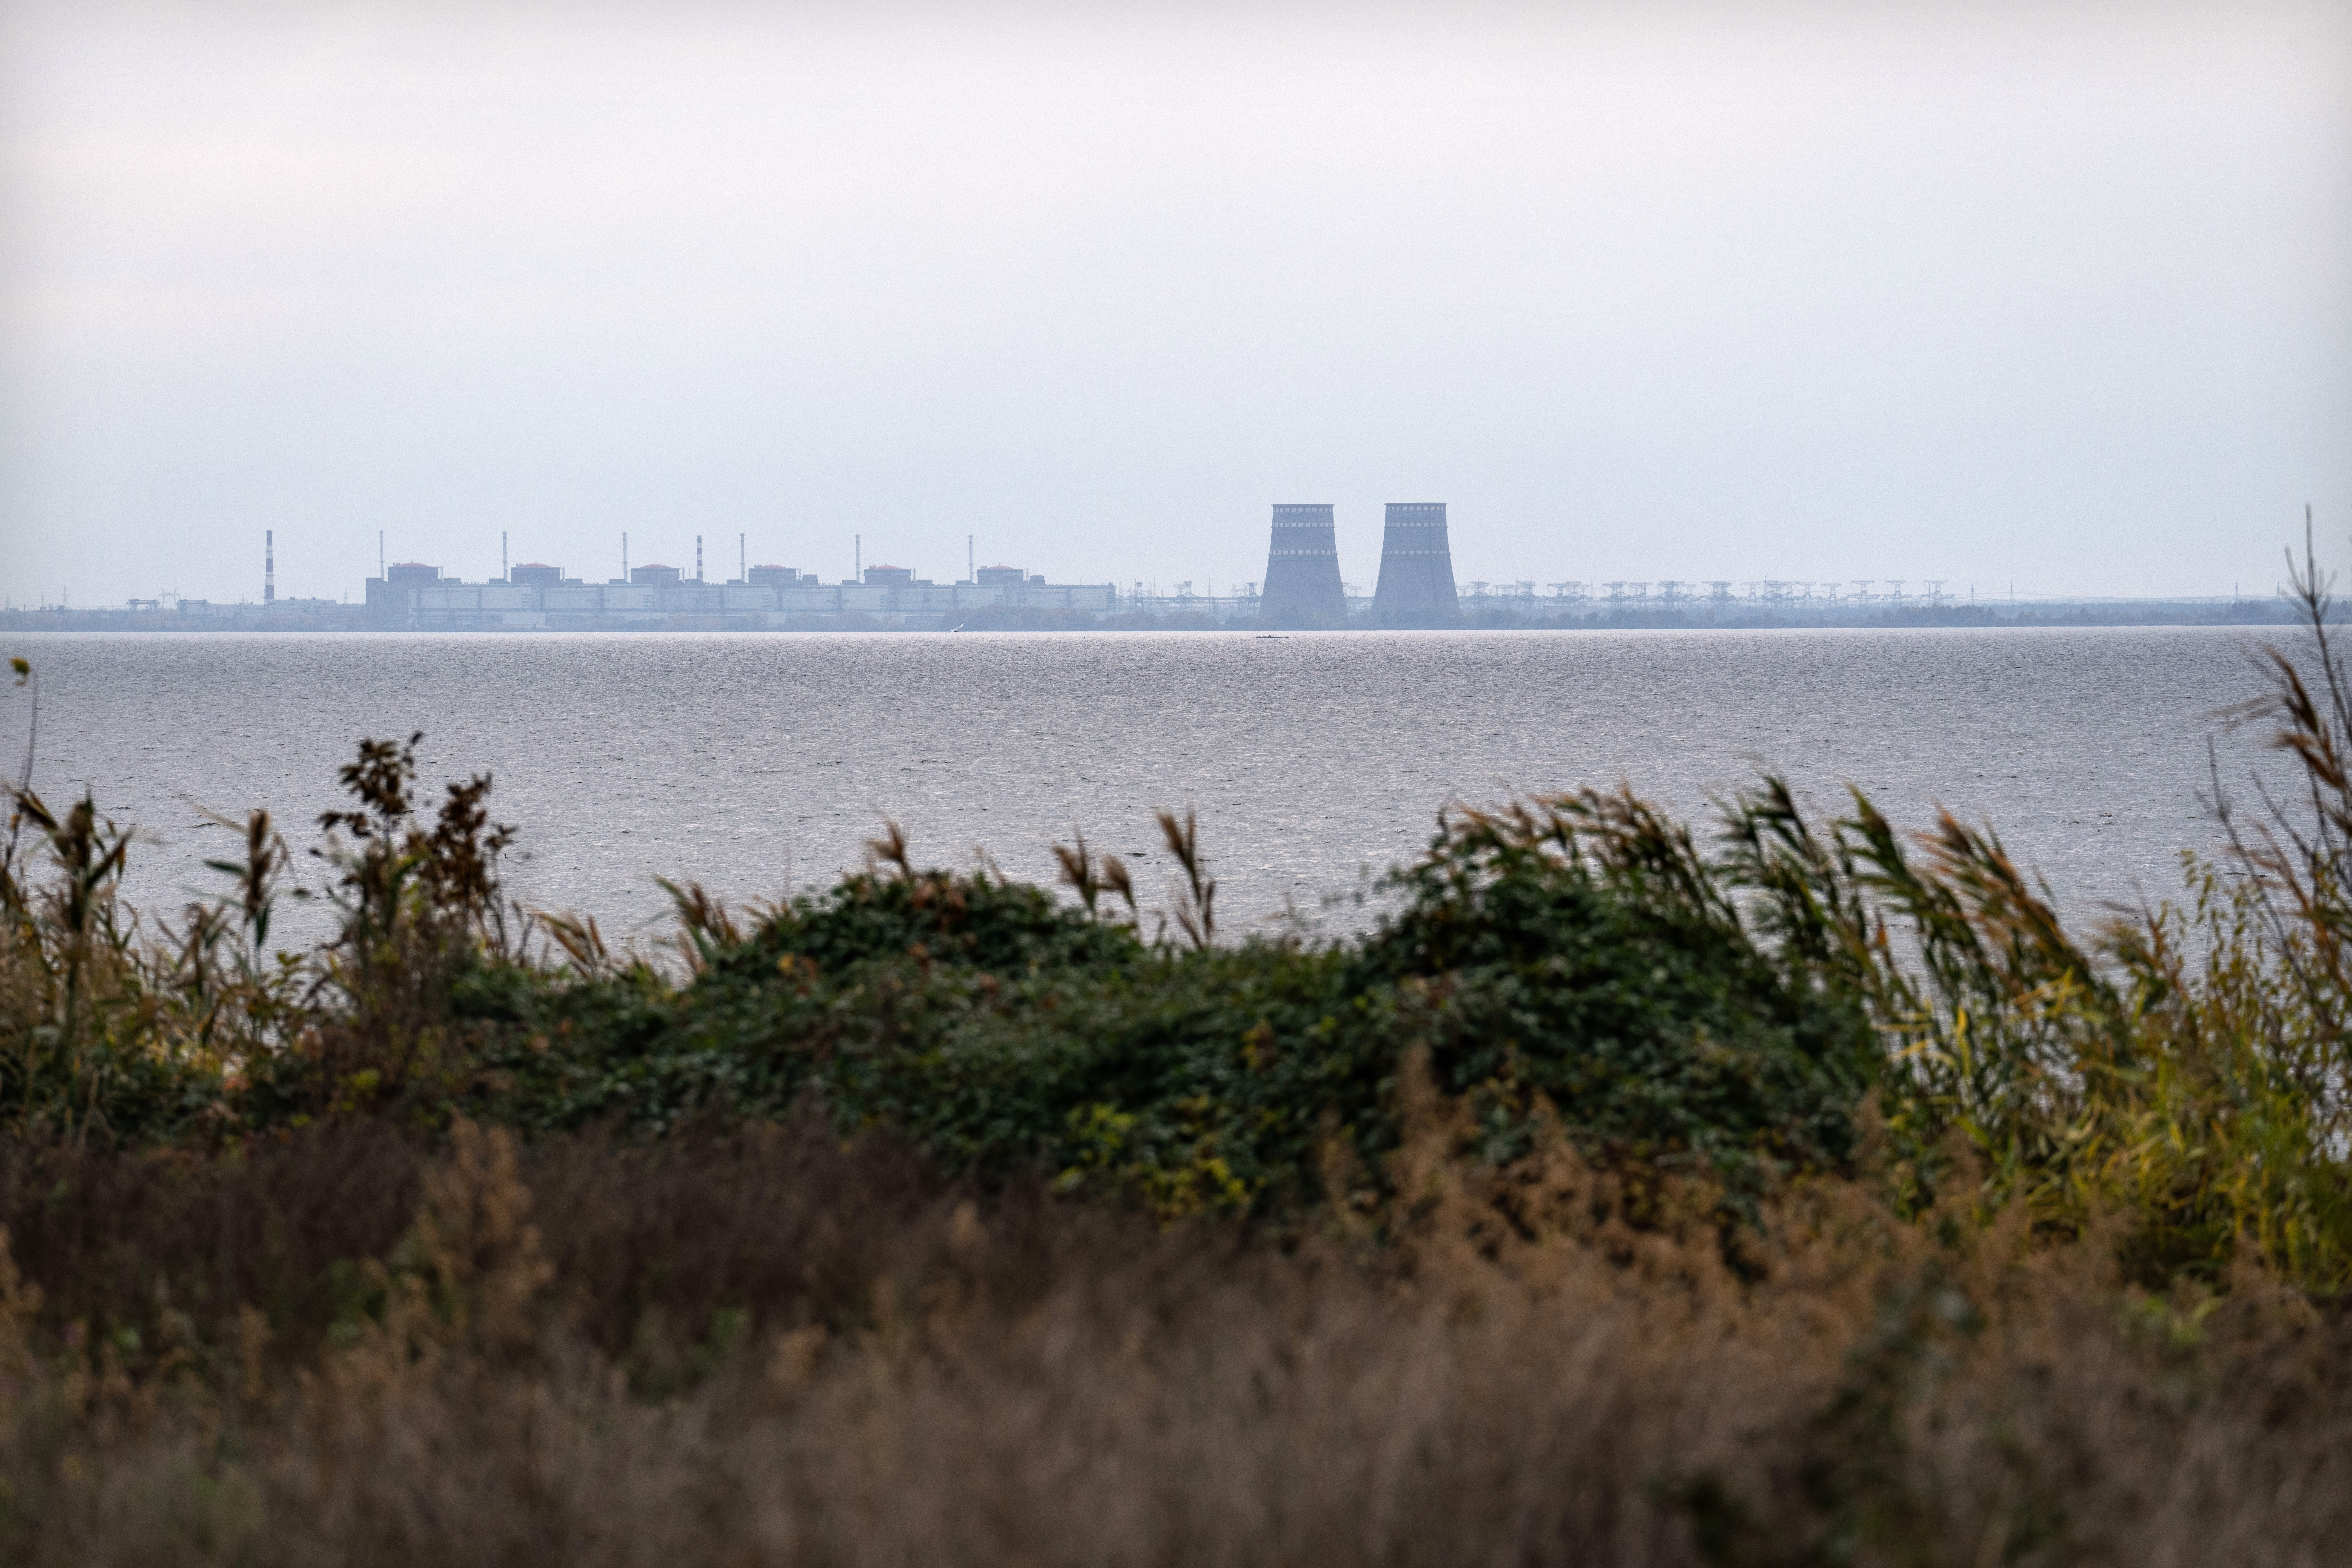 Zaporizhzhia Nuclear Power Plant, Europe's largest nuclear power station, is seen on October 29, in Prydniprovske, Ukraine.